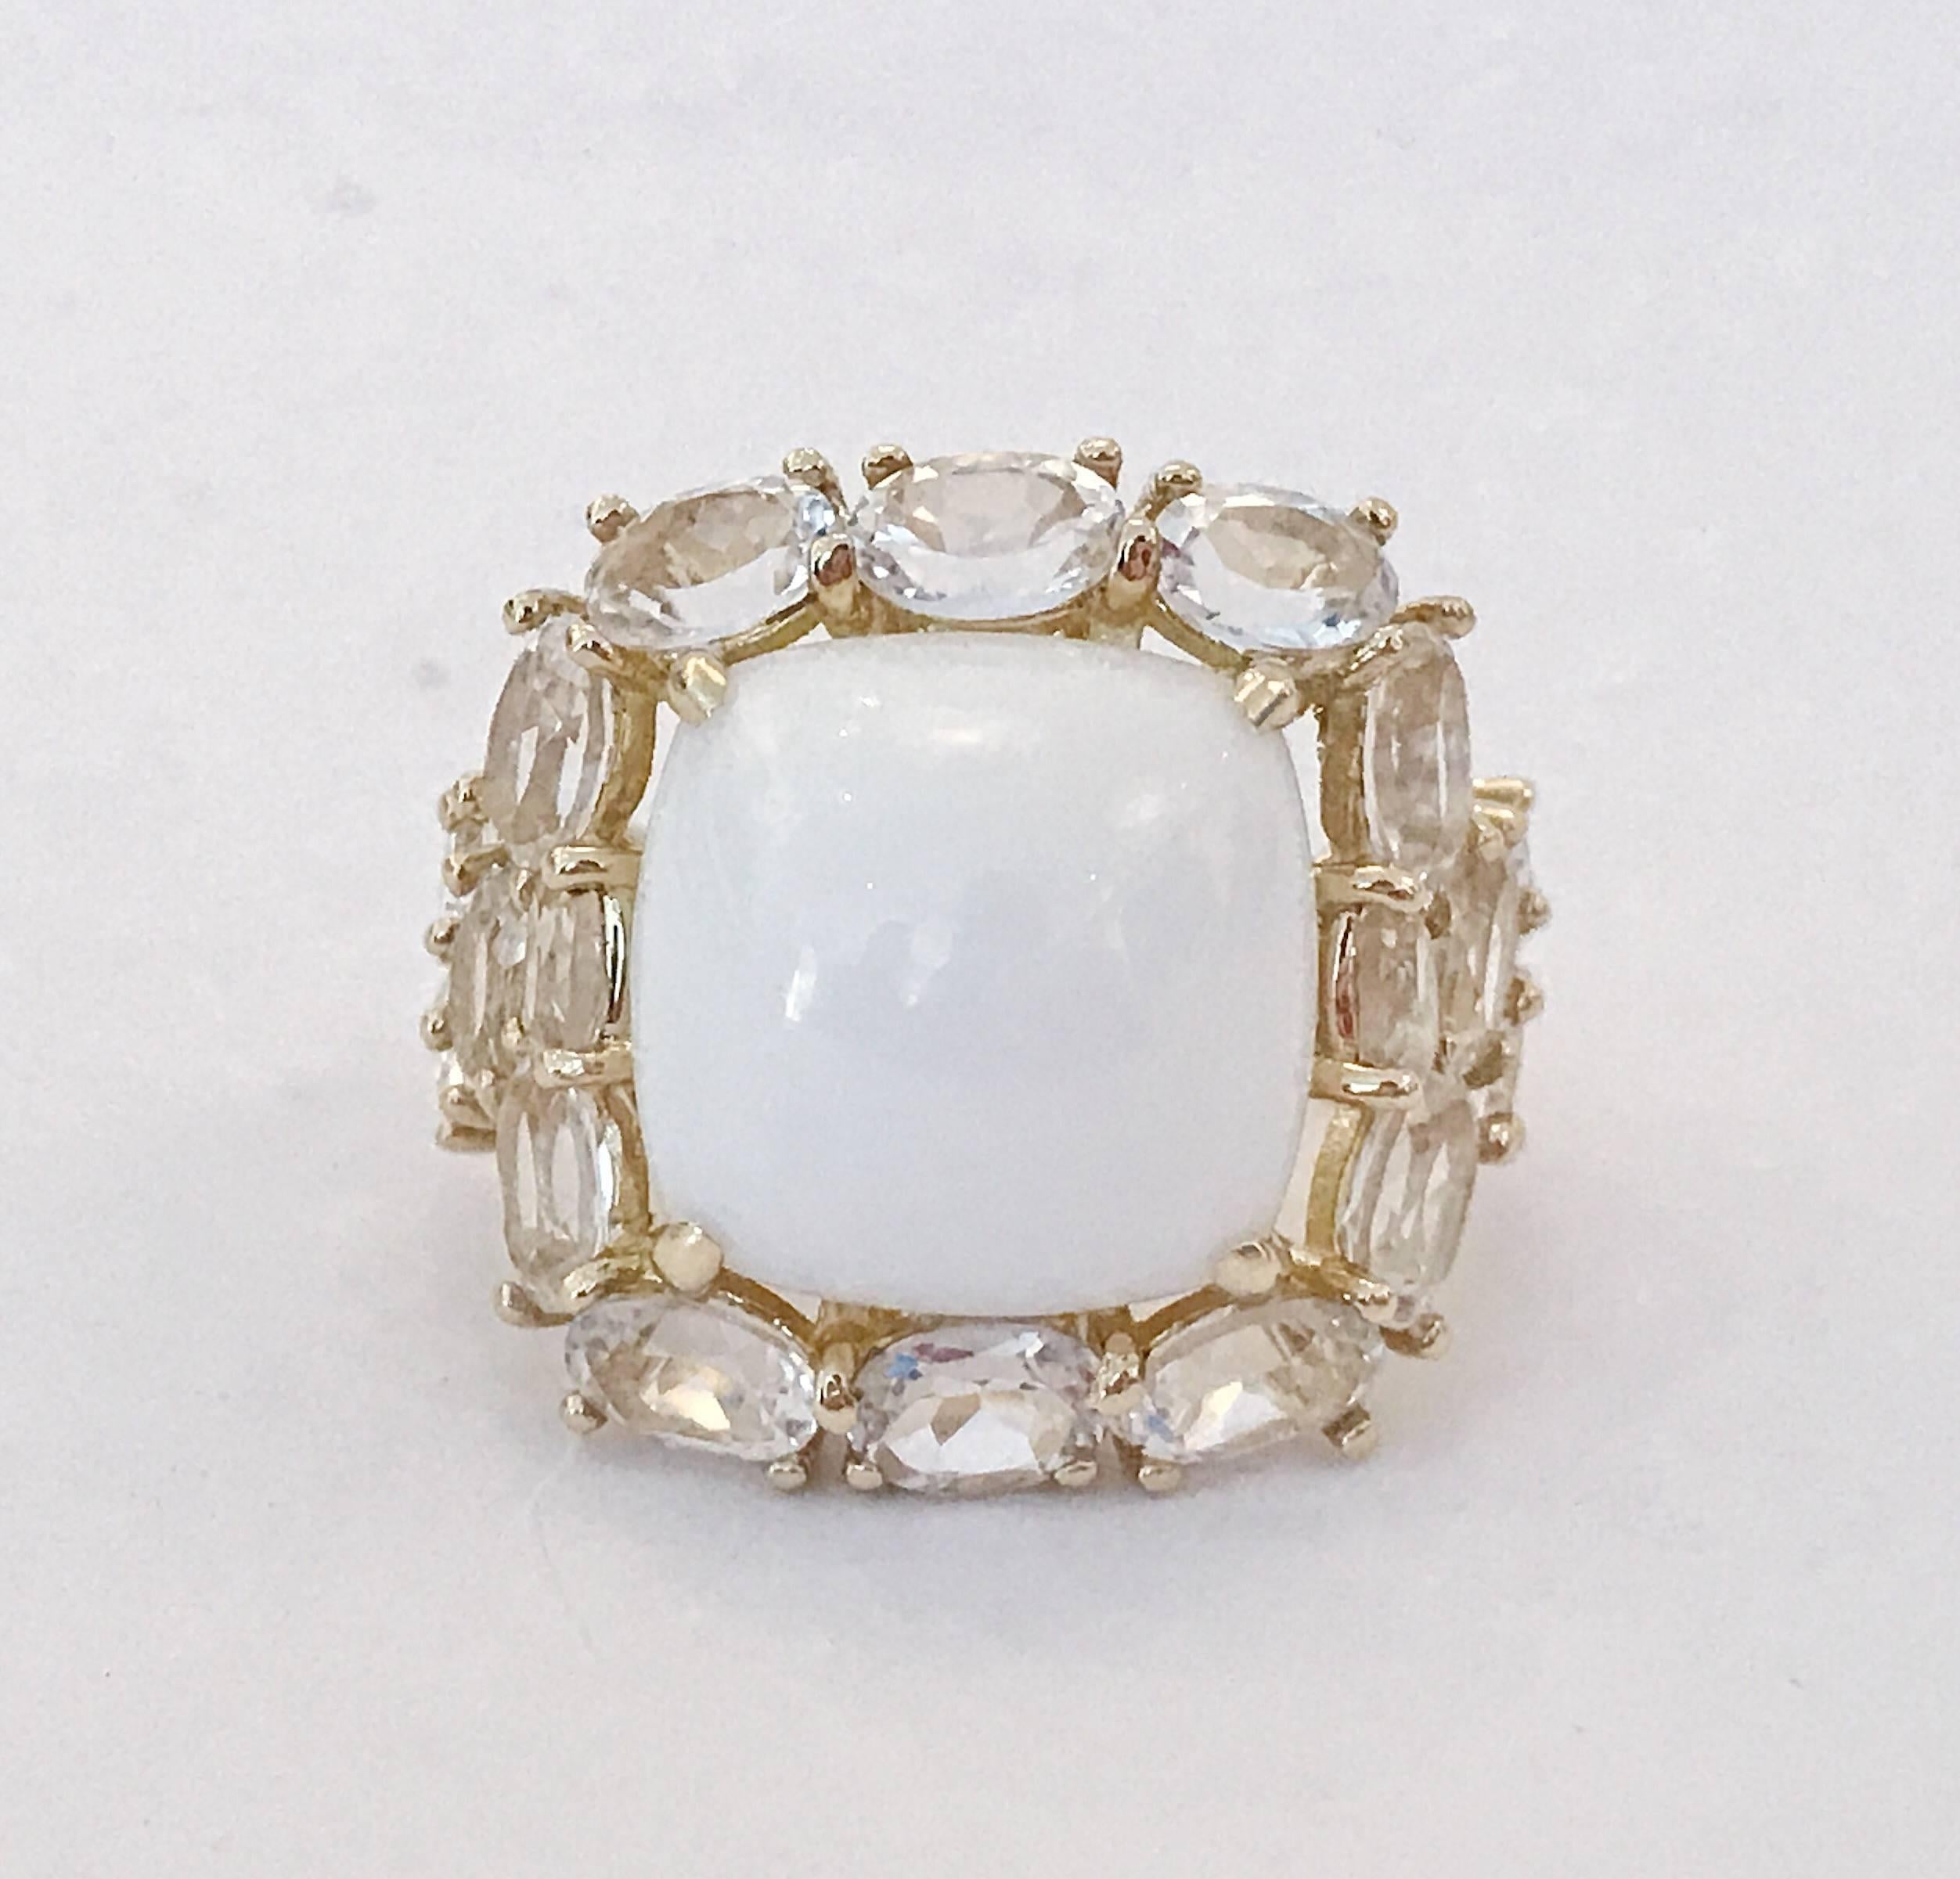 Elegant CLASSIC Cocktail Ring with large cabochon White Jade center surrounded by 18 oval faceted White Topaz adding some classic sparkle to your evening!

the ring measures approximately 1 1/4" diameter.

The Classic Cocktail ring can be made